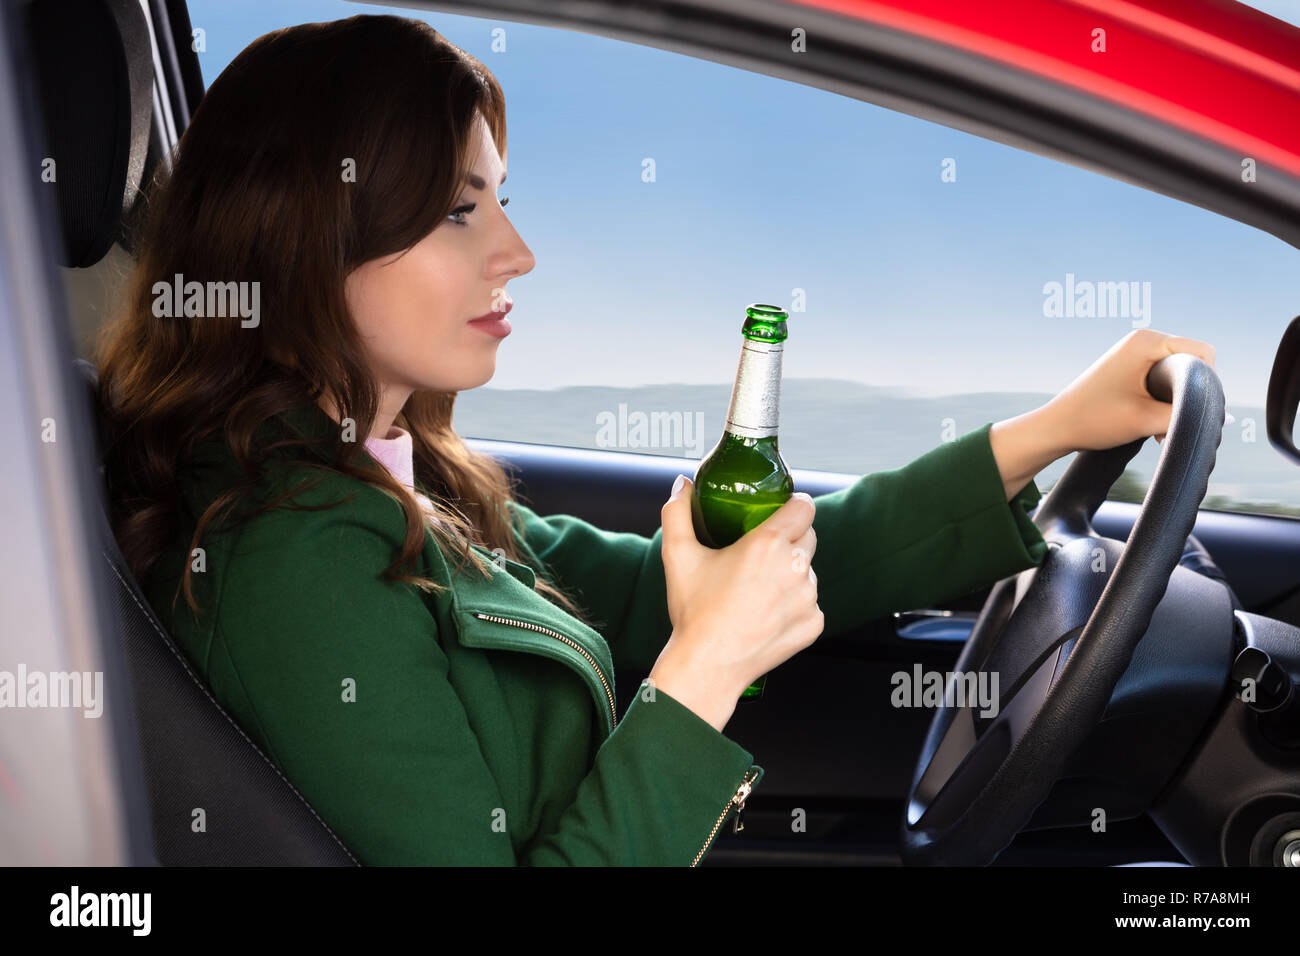 Side View Of A Beautiful Young Woman Holding Beer Bottle While Driving Car Stock Photo